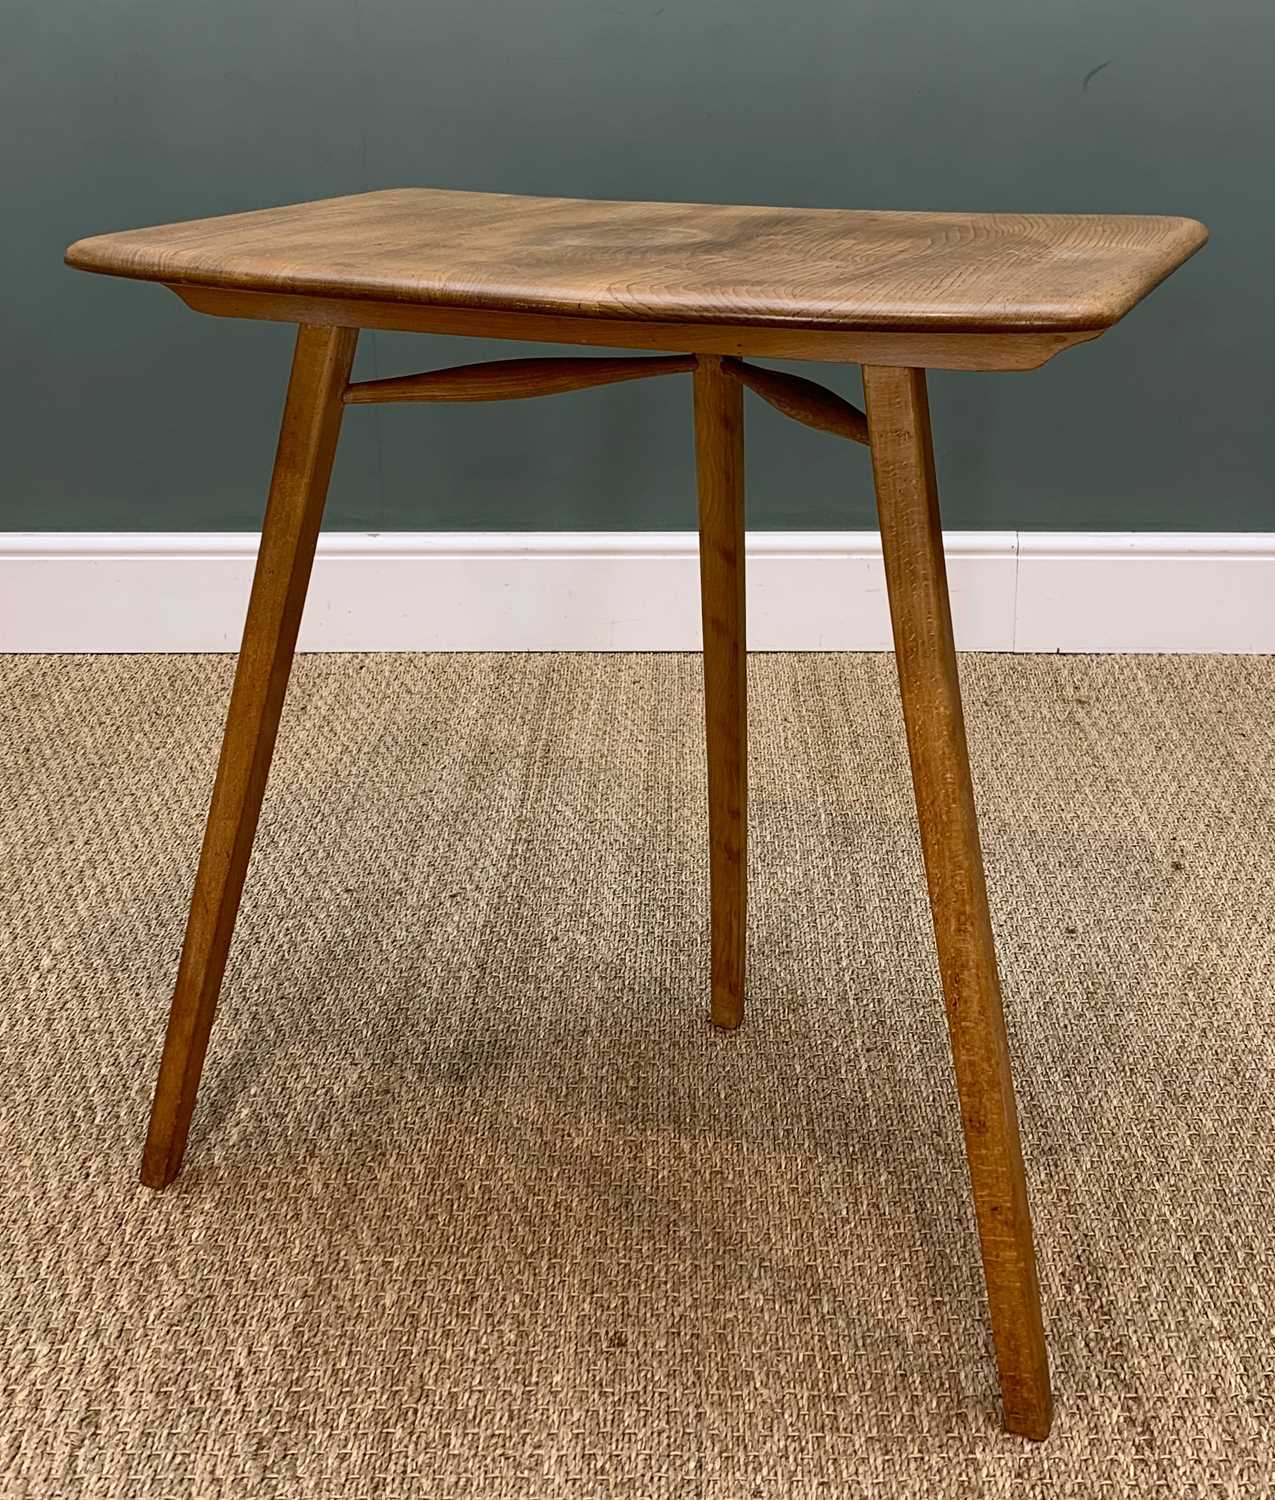 RARE MID-CENTURY ERCOL 265 END TABLE, blue lable, solid elm and beech, stand alone three-legged - Image 4 of 7